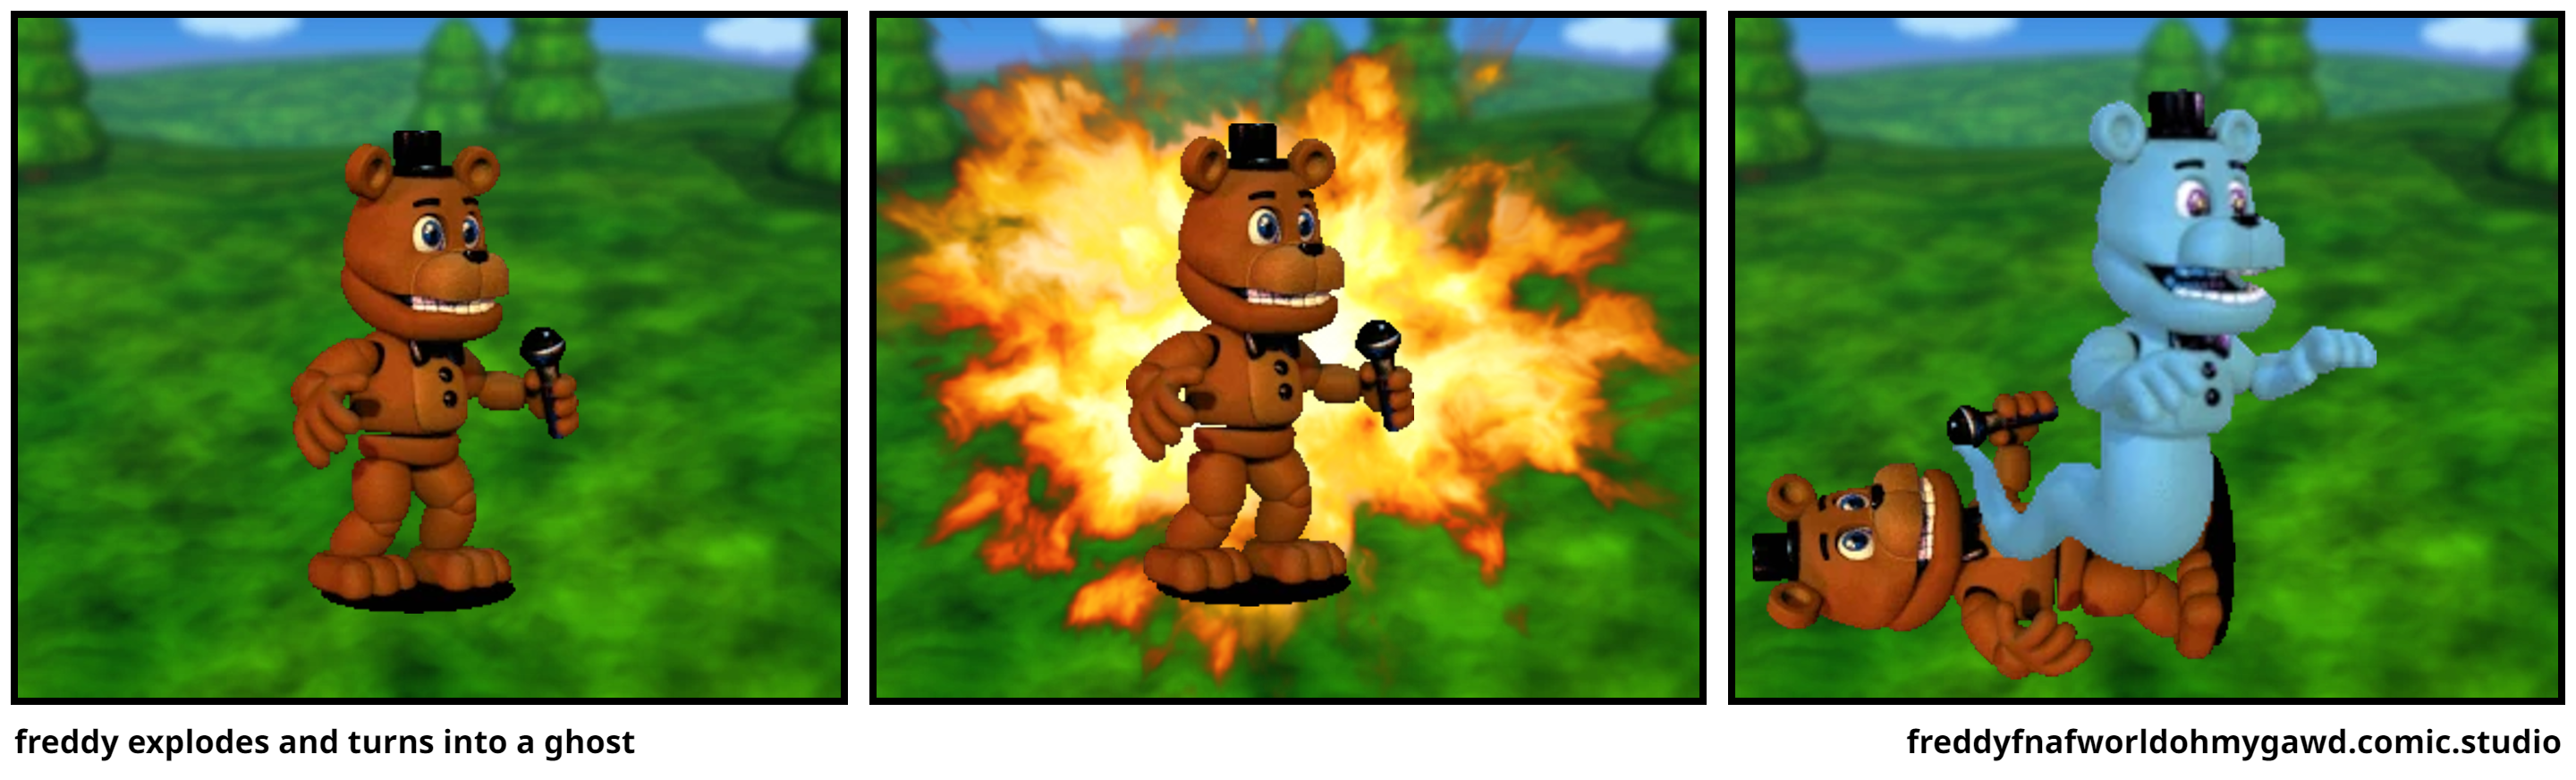 freddy explodes and turns into a ghost